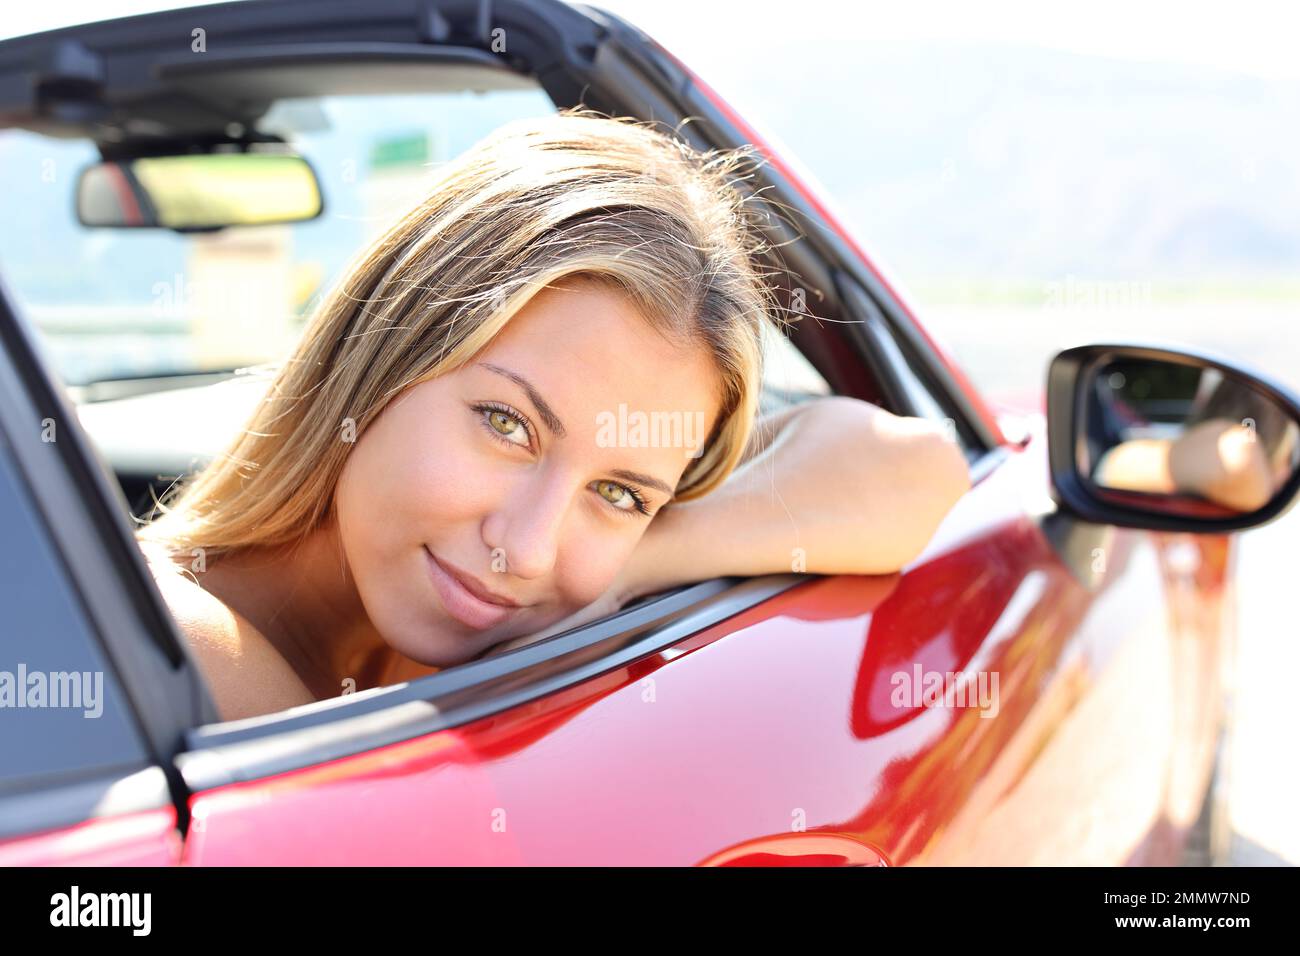 Satisfied driver in a convertible car looking at camera Stock Photo